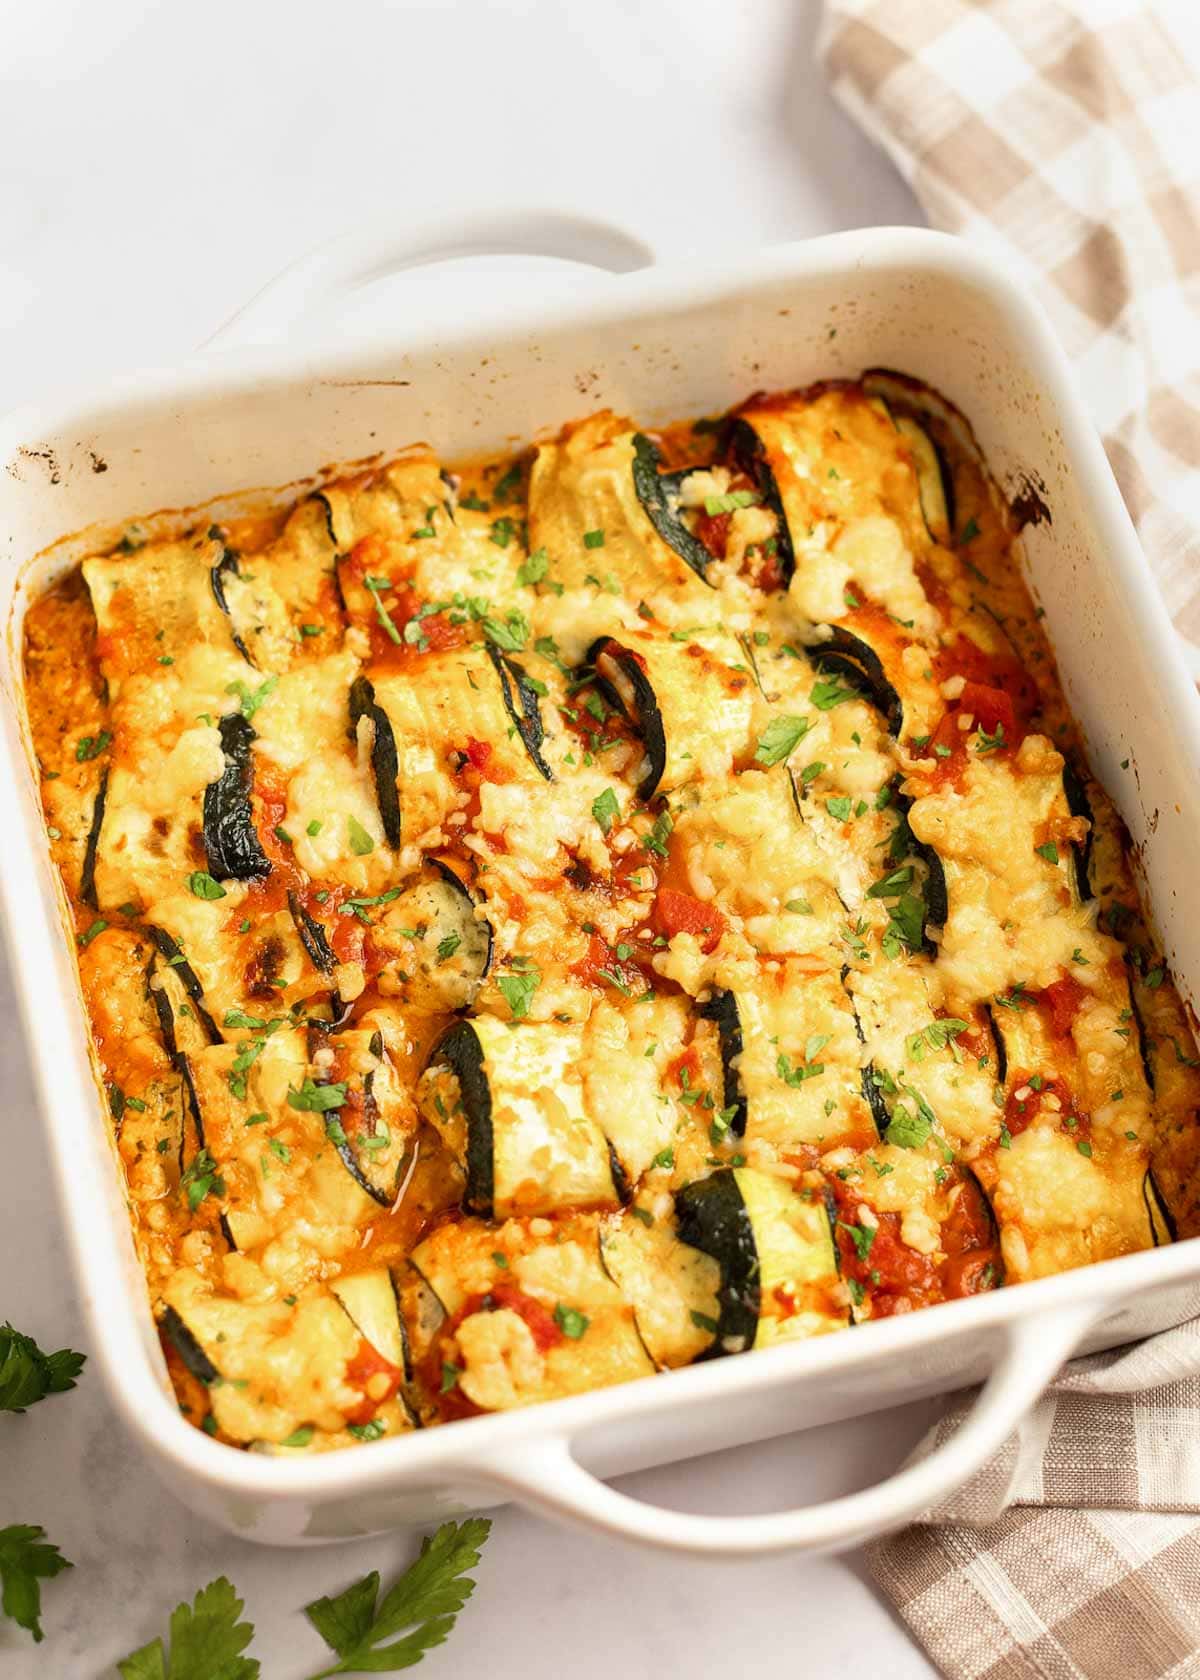 These delicious Zucchini Lasagna Rolls give you all your favorite flavors in a cheesy, creamy filling for less than 1 net carb each! This low-carb zucchini recipe is vegetarian, gluten-free, and perfect for a date night.